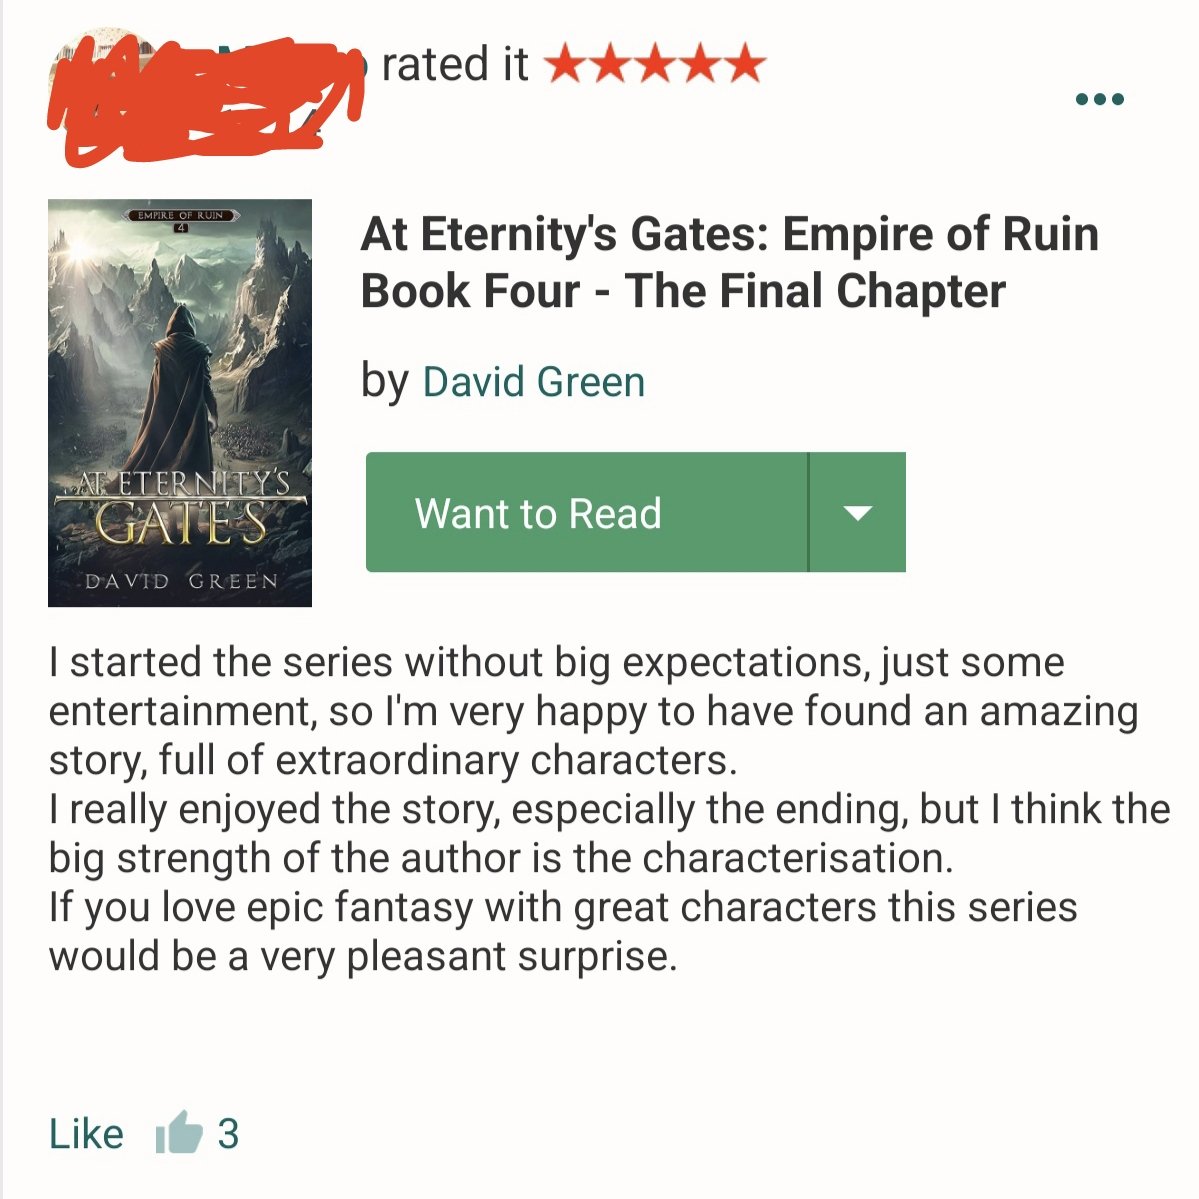 Nice little review of the final book in my Empire of Ruin series. Character is where it's at with me, so I'm happy my work landed with this reader 🦉